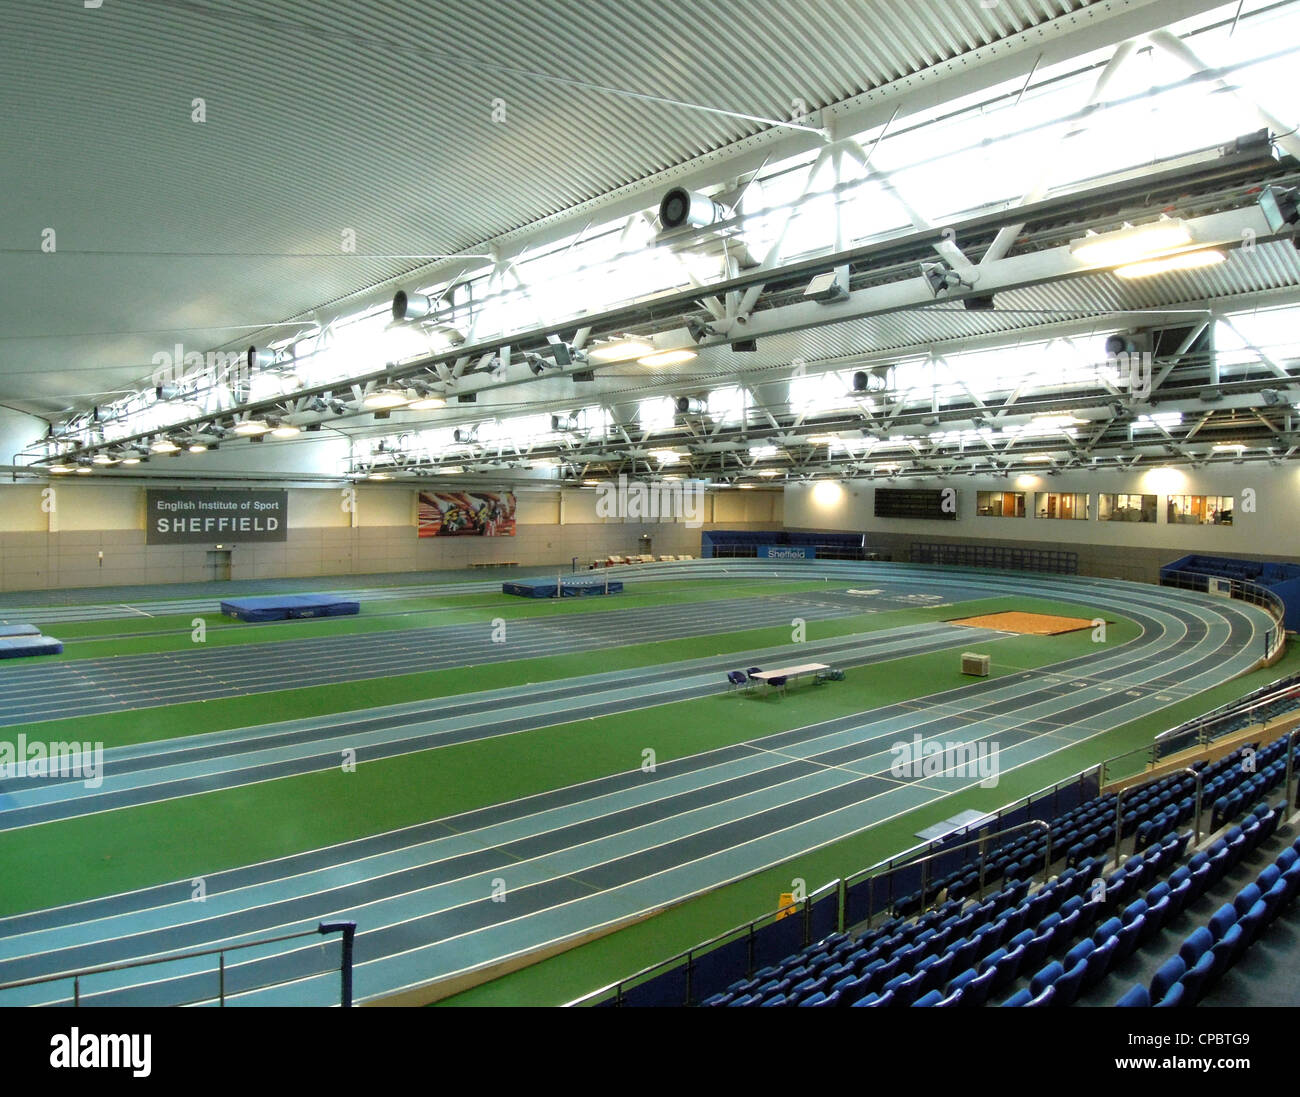 The English Institute of Sport in Sheffield, UK. A national centre for sports training, medicine and science. Stock Photo